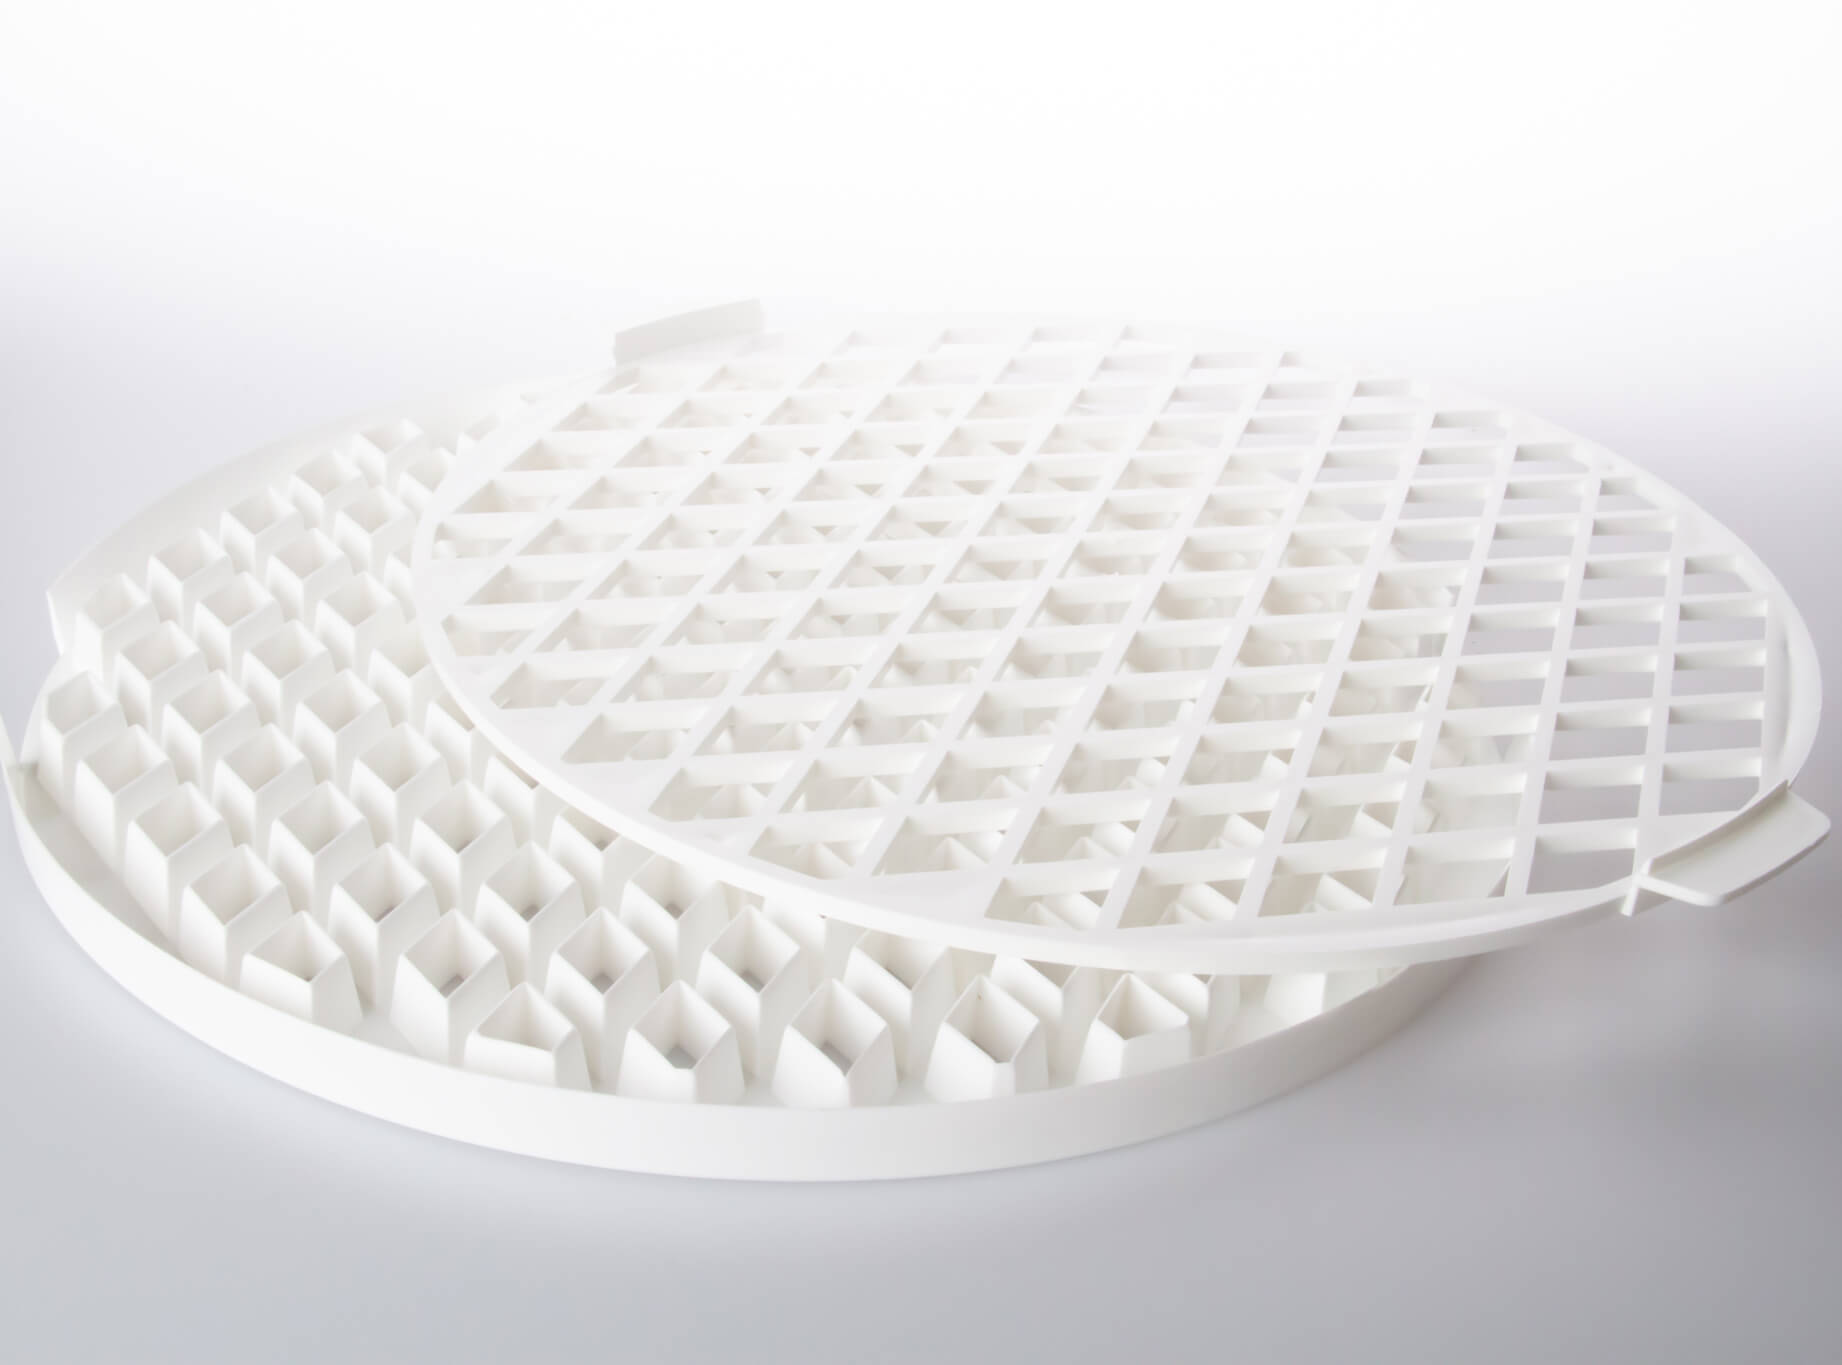 Creeds Pastry Lattice Cutters